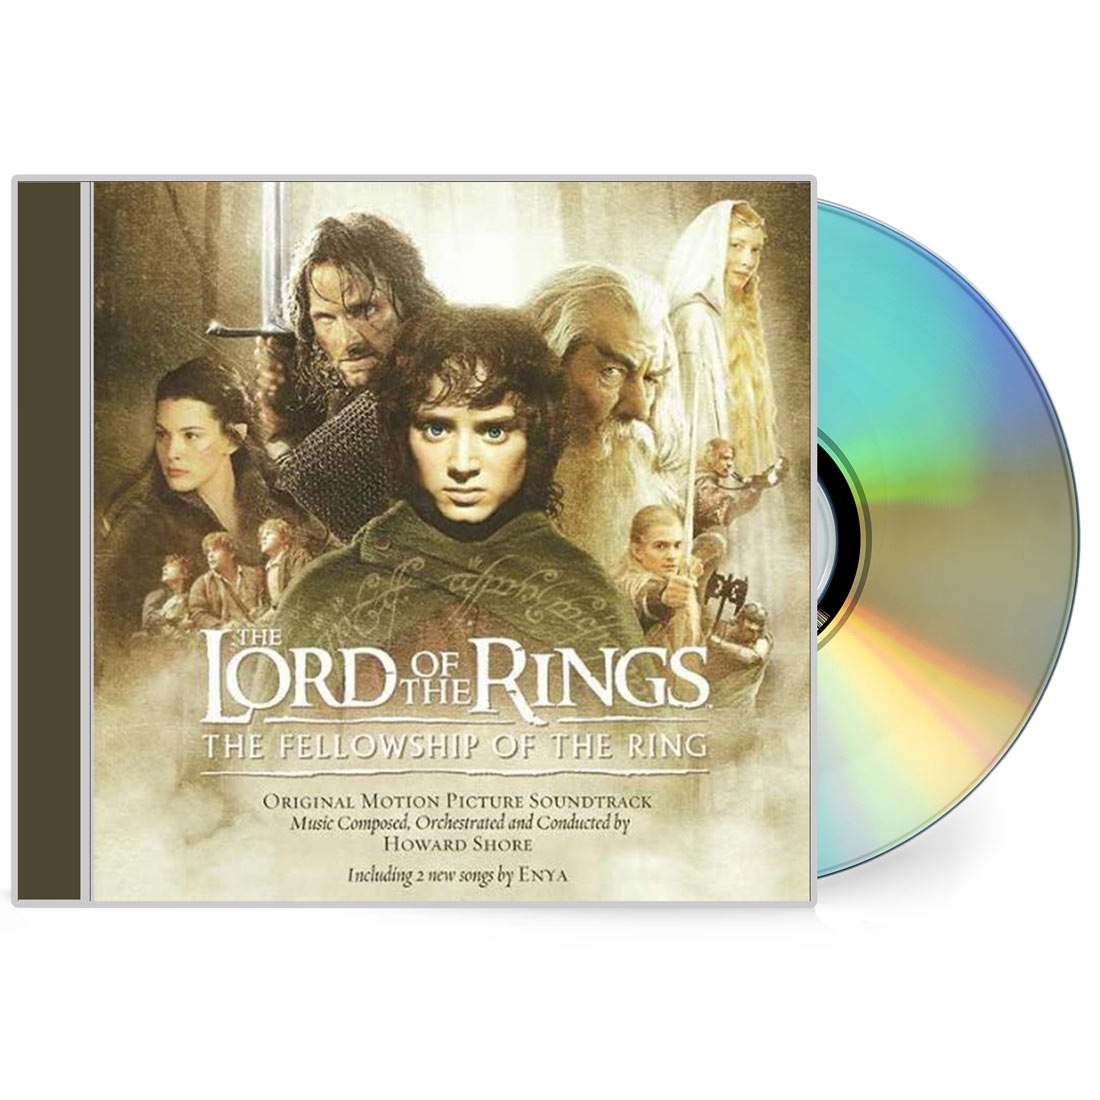 Lord of the Rings music is coming to Radio City Music Hall